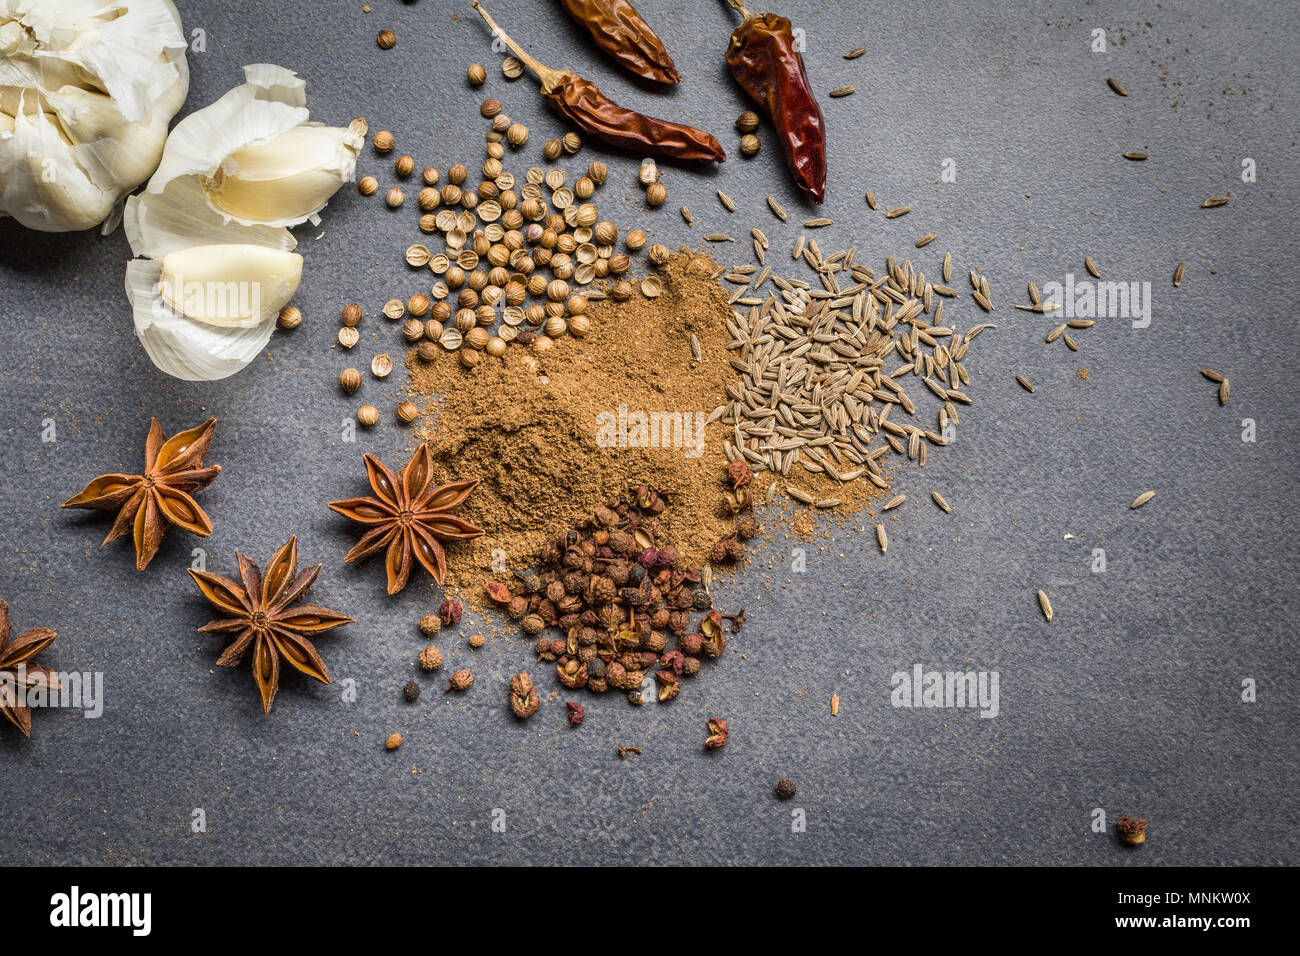 Overhead view of ingredients for cooking Asian recipe. Spices on a mid grey background Stock Photo